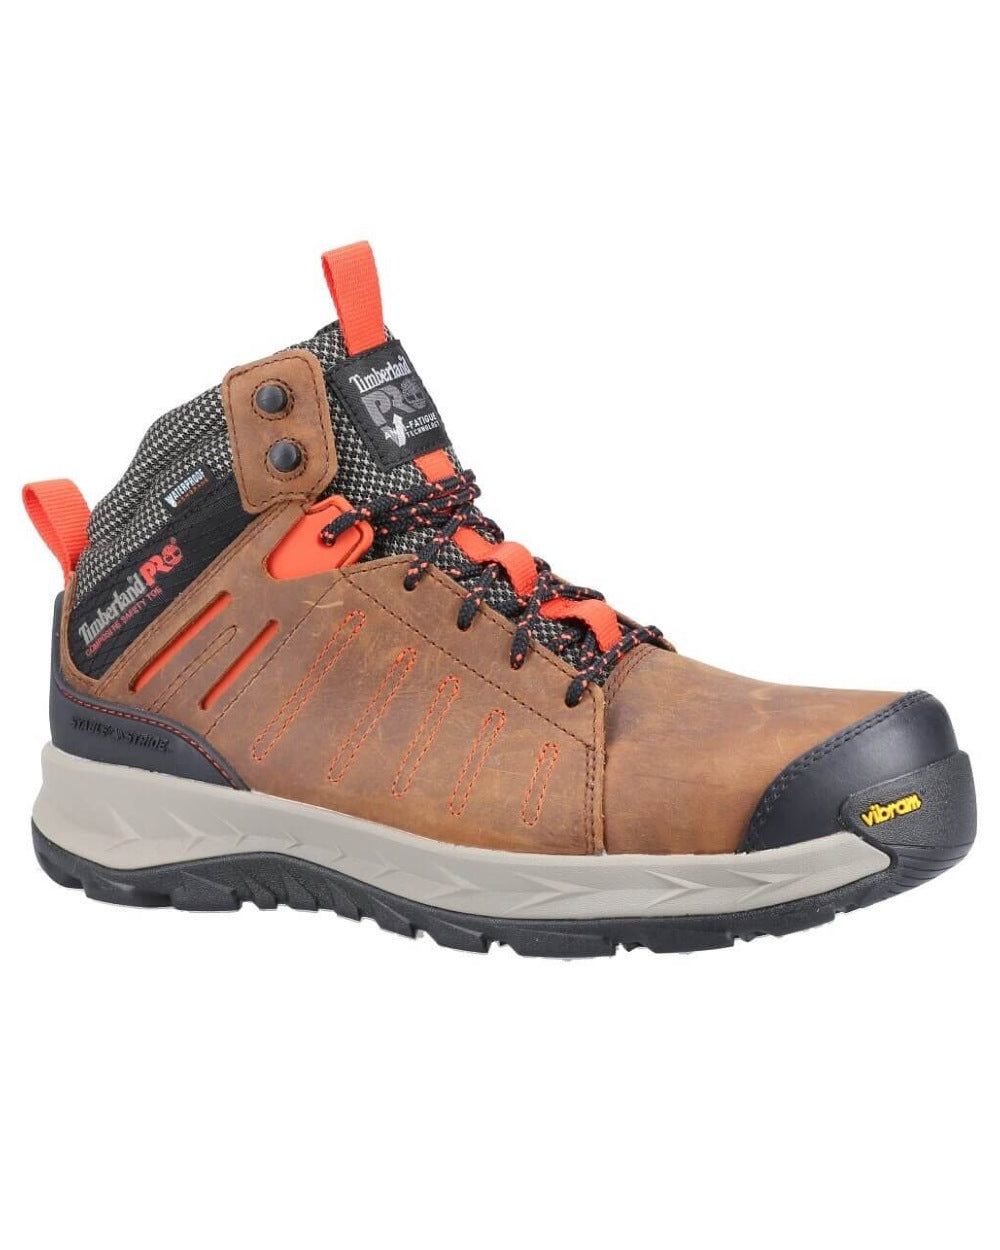 Brown coloured Timberland Pro Trailwind Work Boots on white background 